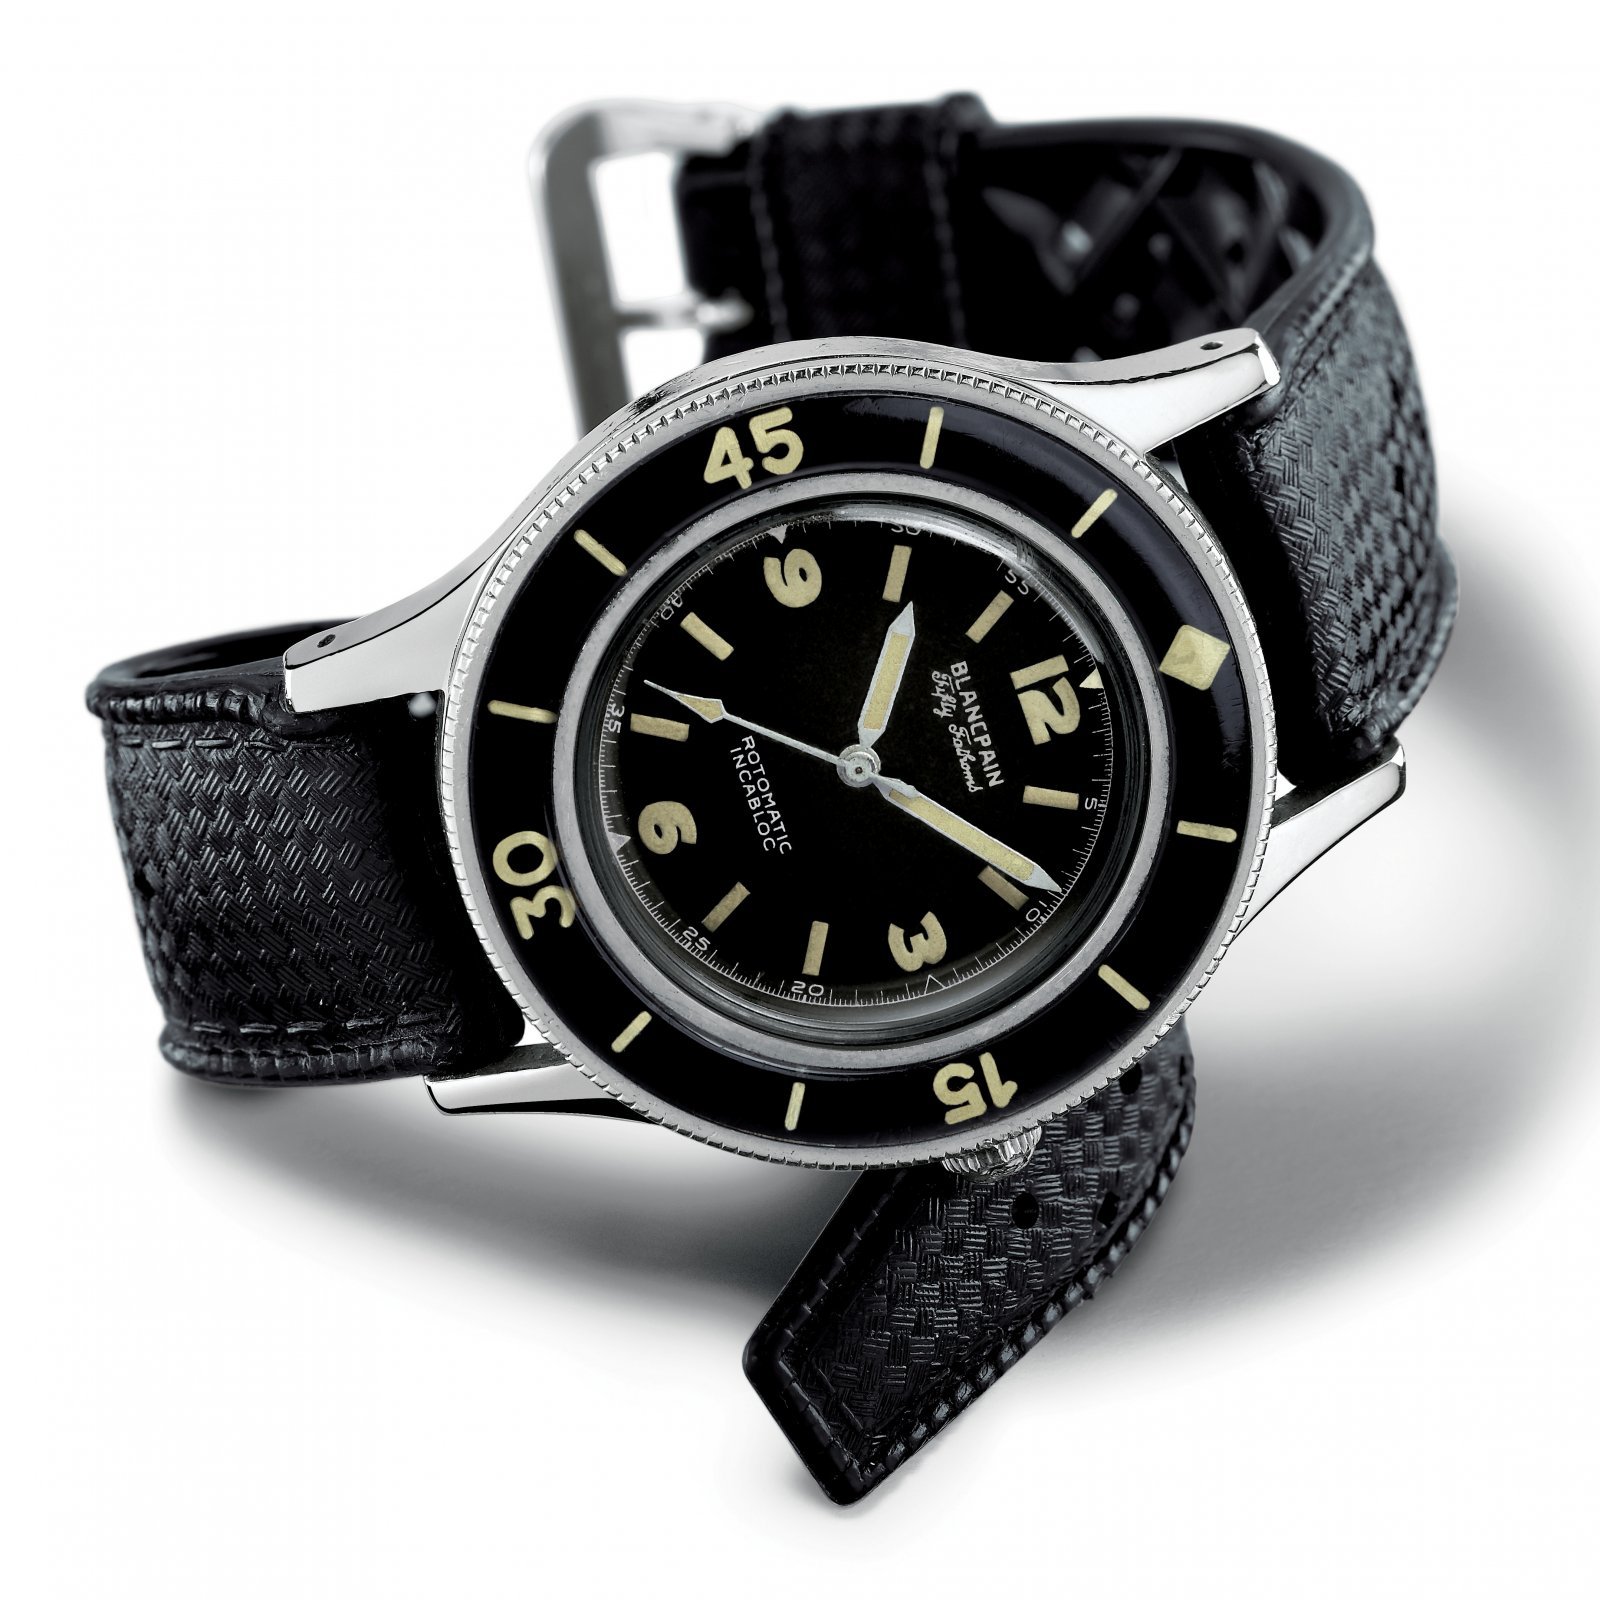 blancpain_01_1953-the-first-fifty-fathoms.jpg